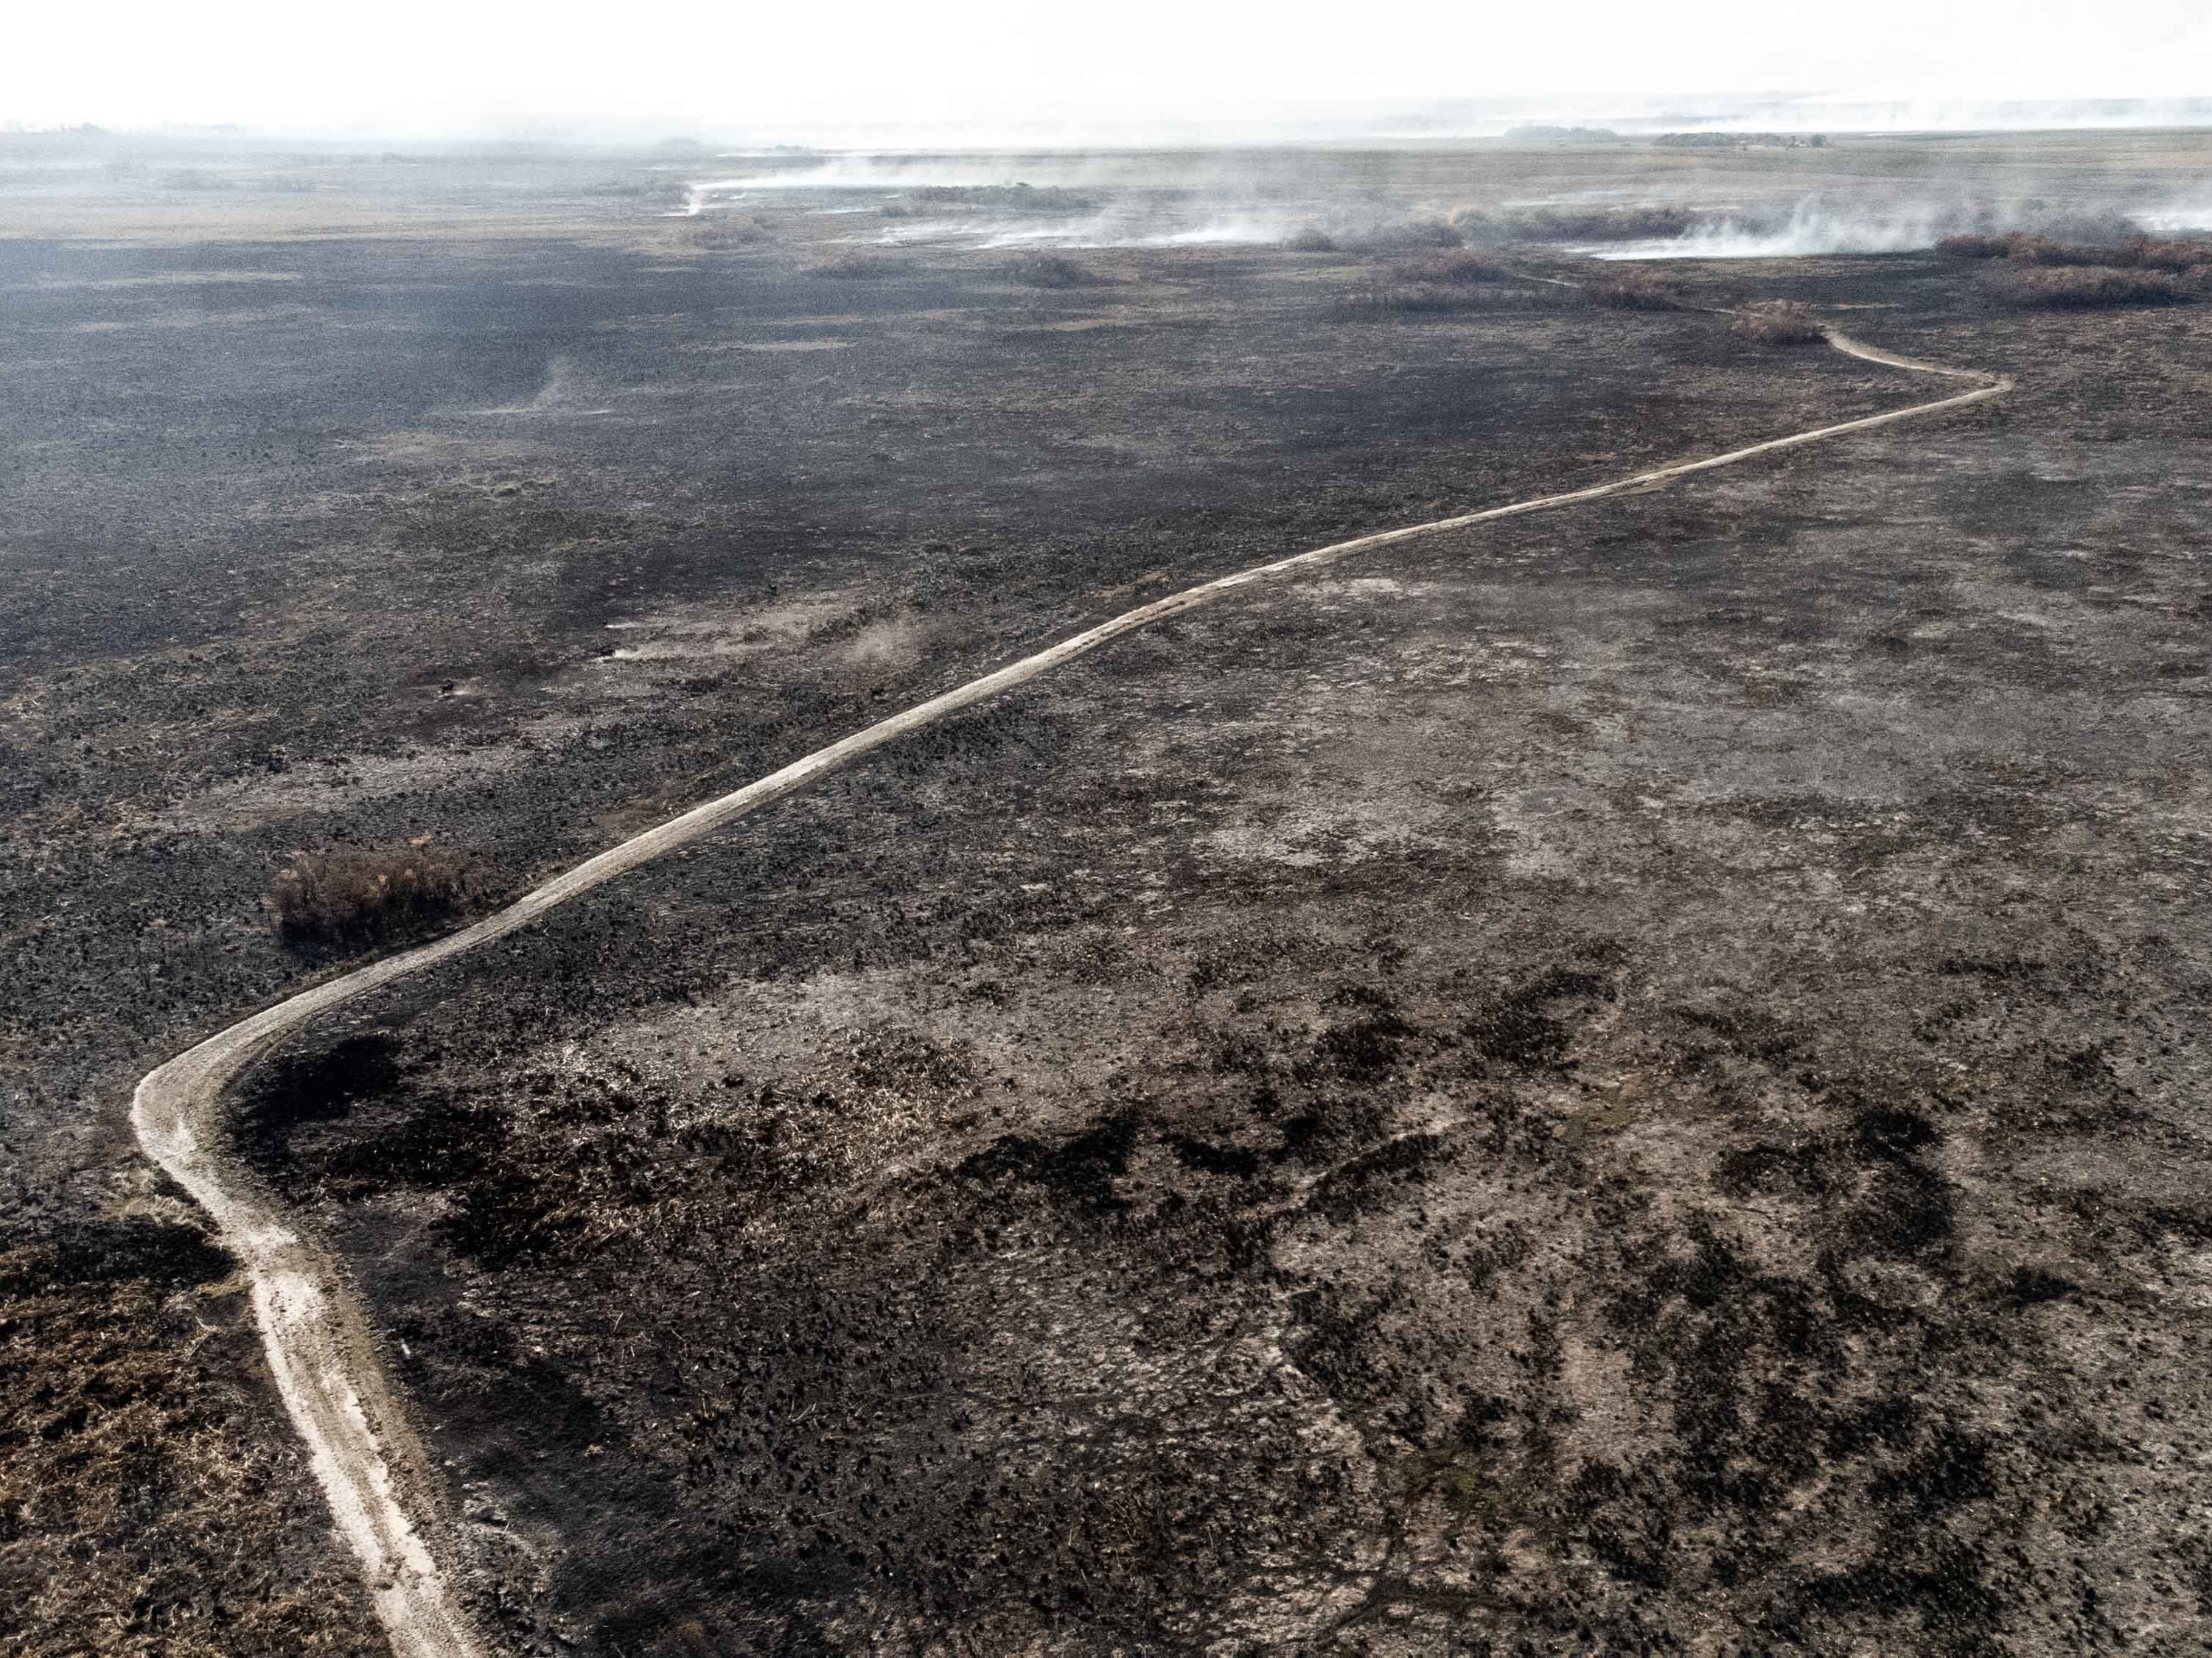 The burnt landscape of the Ibera National Park in the Province of Corrientes